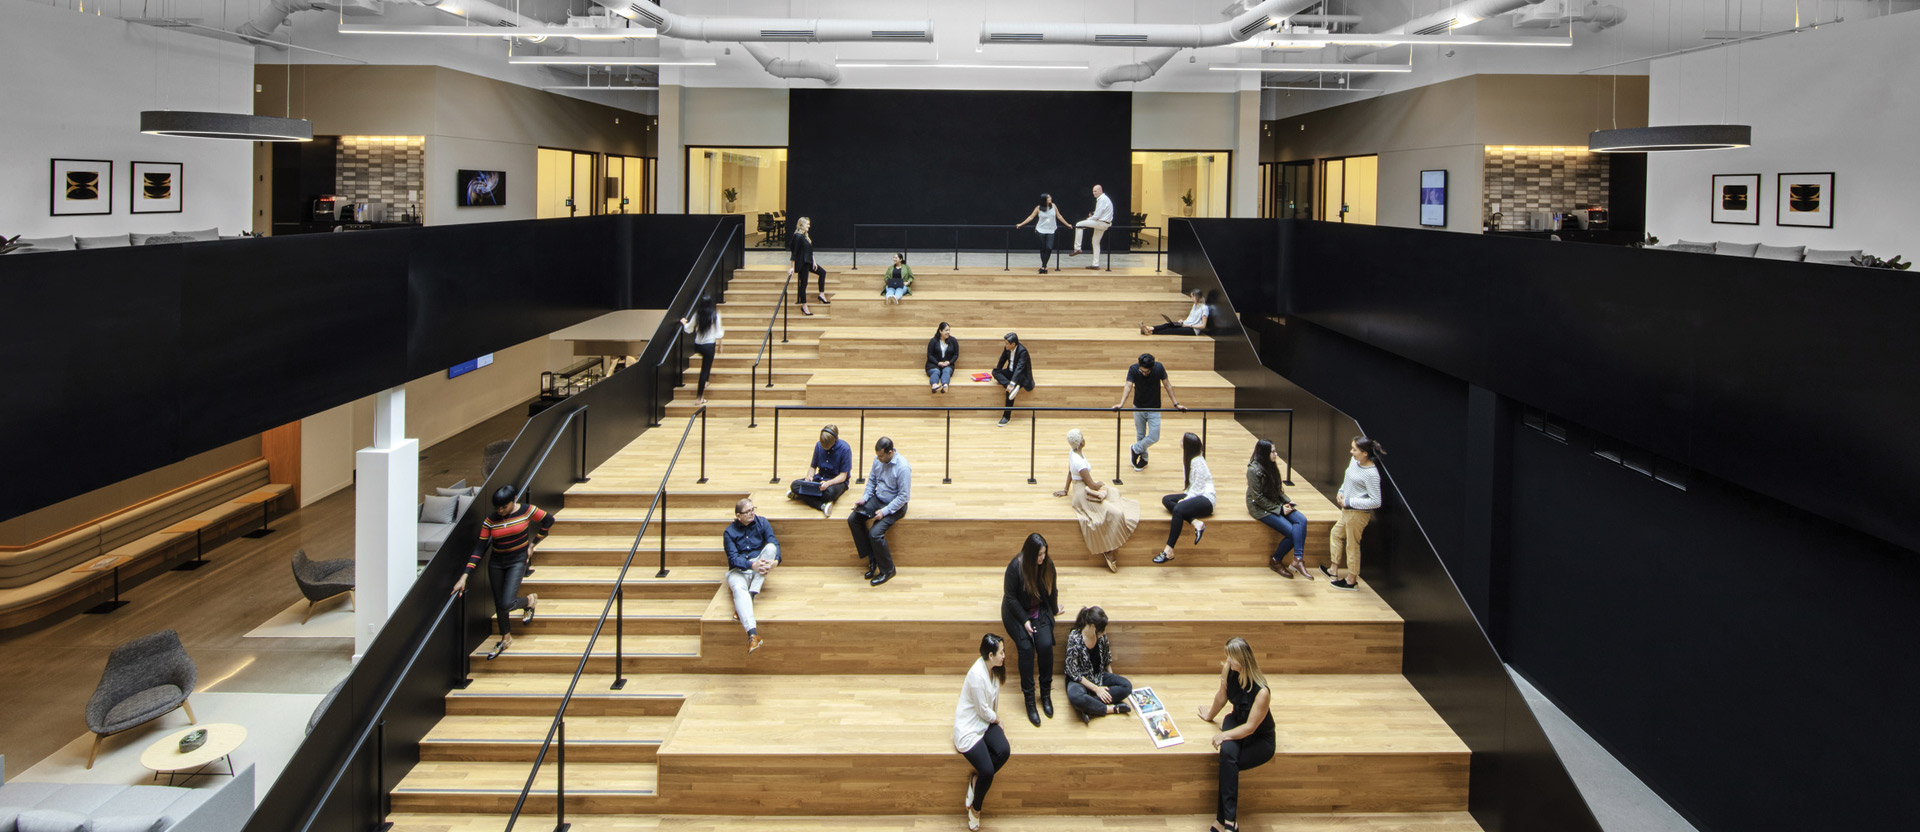 Spacious, modern interior features tiered wooden seating with people casually scattered, engaging in discussions and work. Above, a white industrial ceiling with exposed ductwork contrasts starkly with the warm-toned flooring and matte black partitions, highlighting a contemporary, collaborative workspace design.